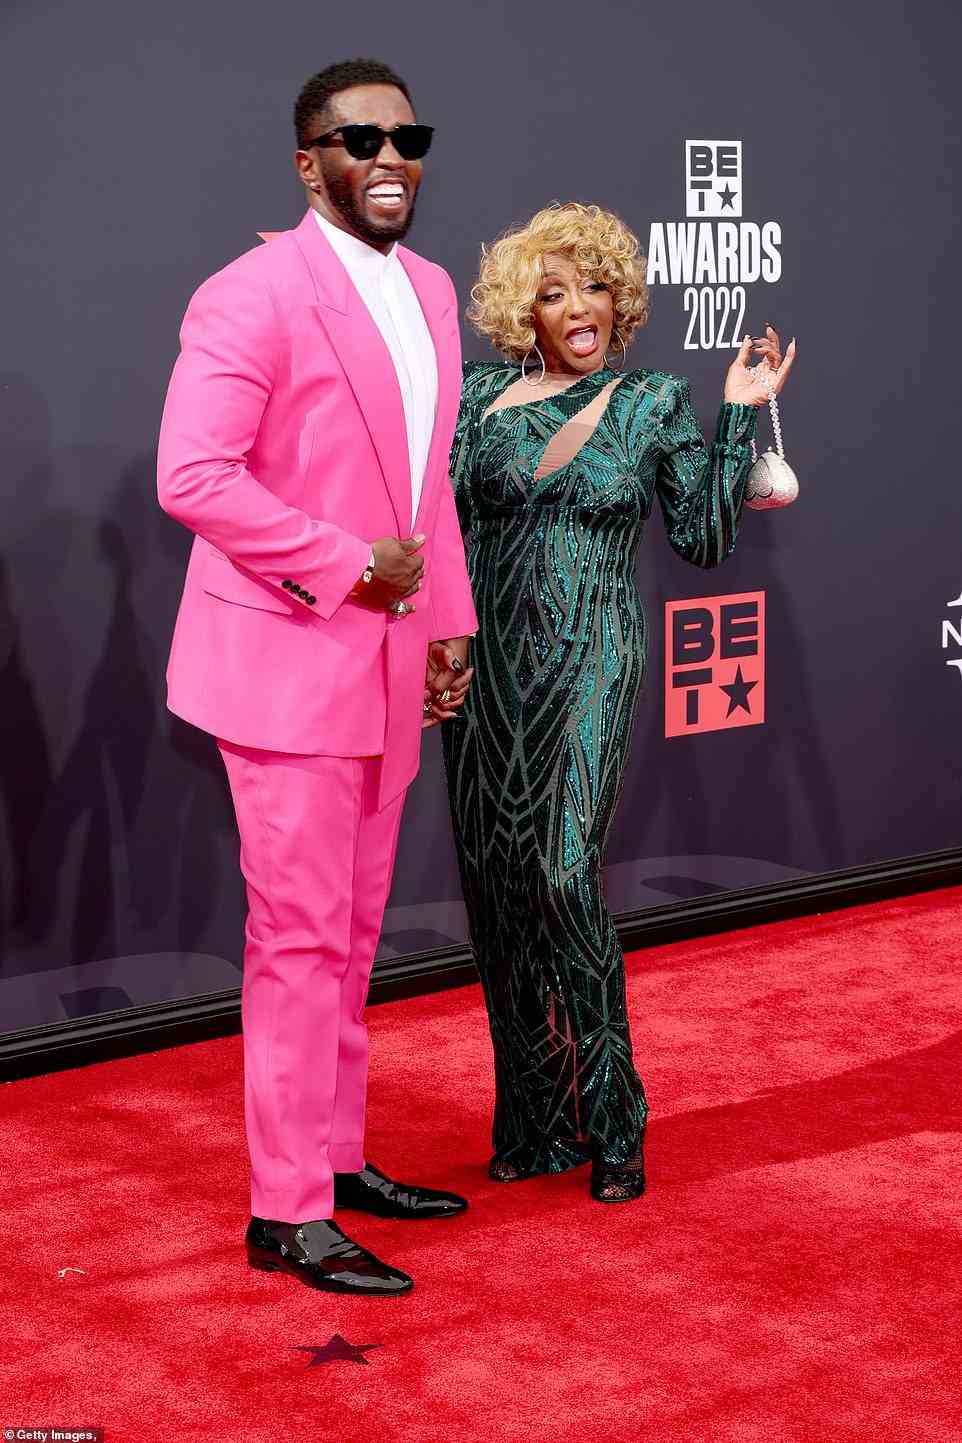 Mother and son: He was seen posing with his mother, Janice Combs, who looked spectacular in a shimmery green gown and curly blonde hair